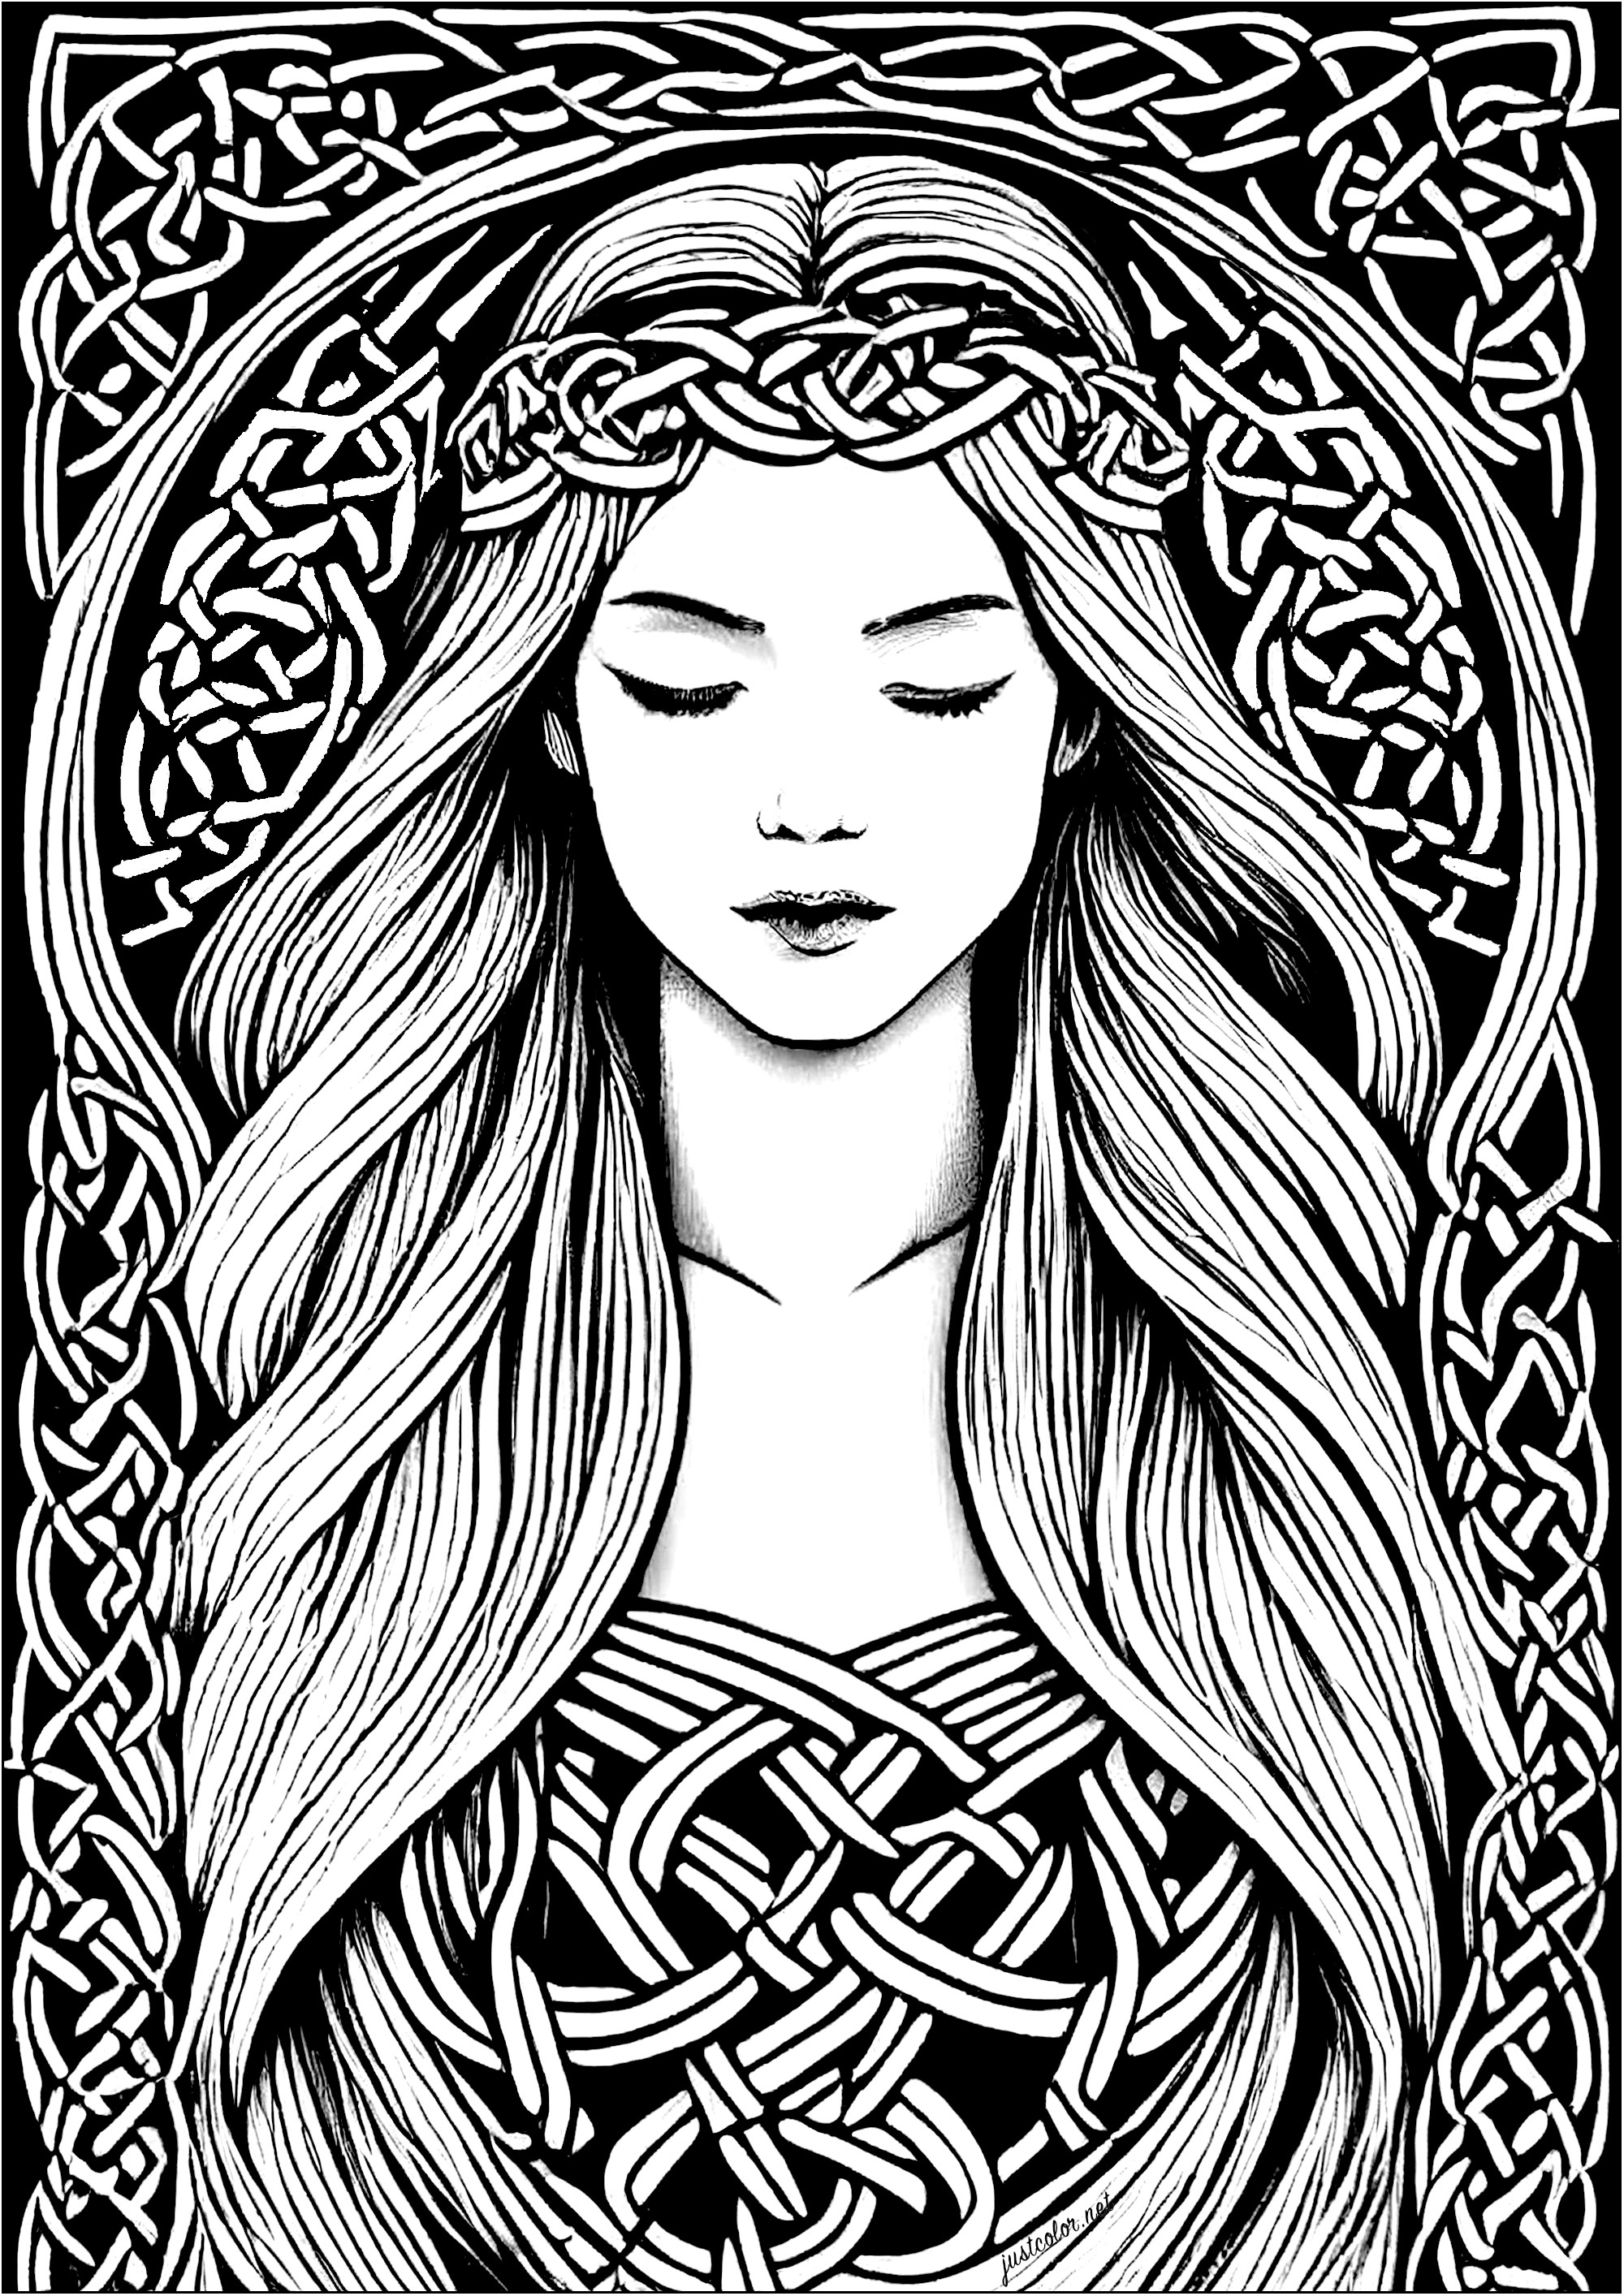 Sleeping Irish Woman & Celtic Patterns Art Adult Coloring Pages